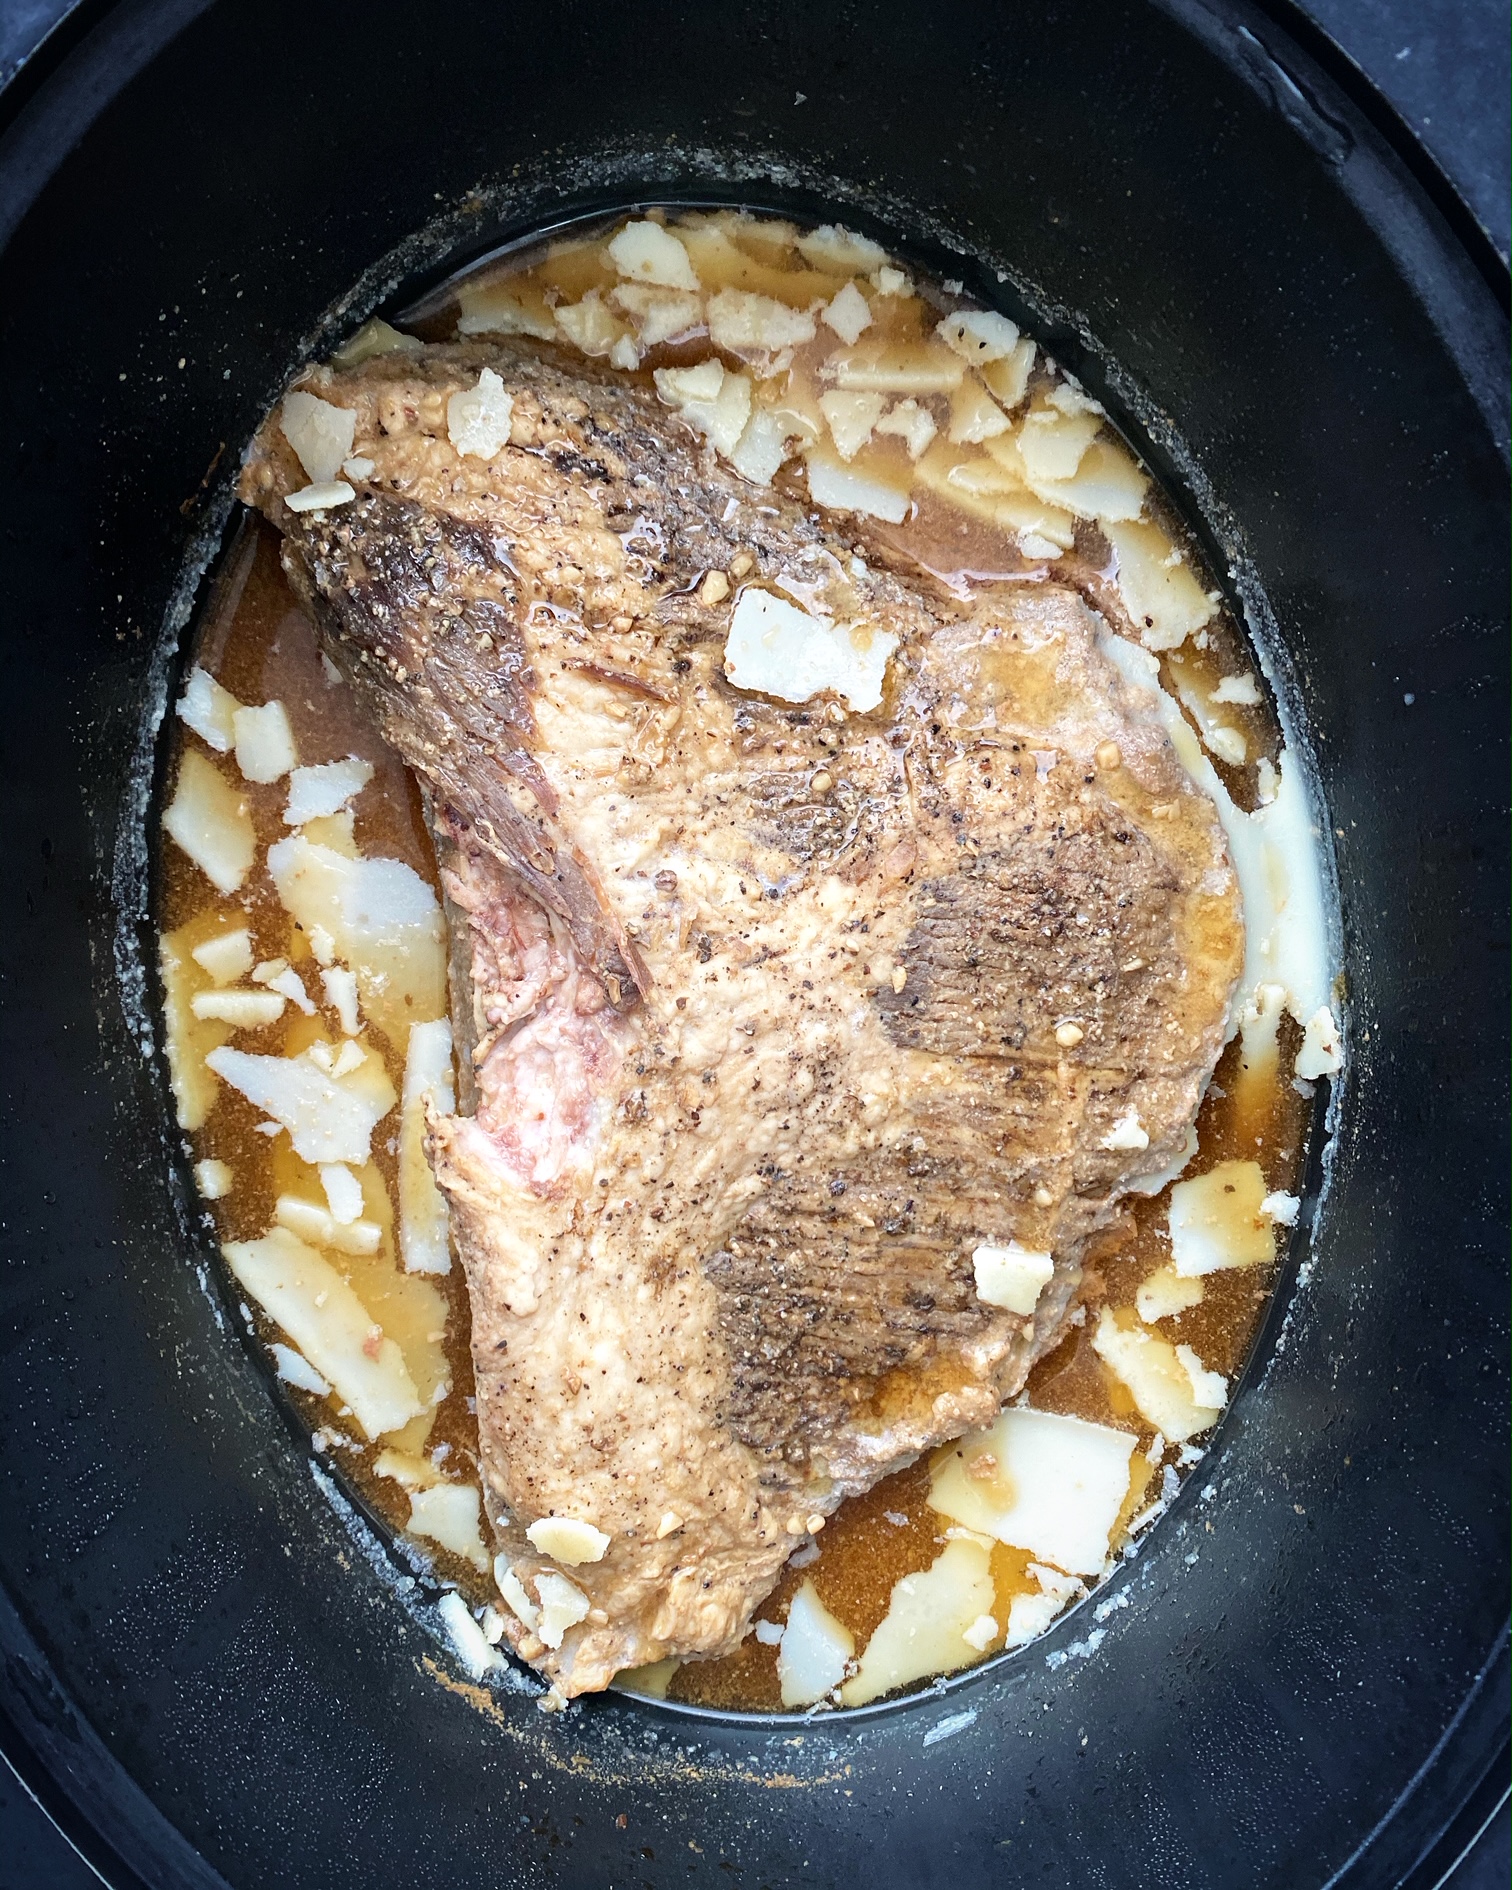 cold, cooked brisket in the slow cooker with hardened fat around the edges